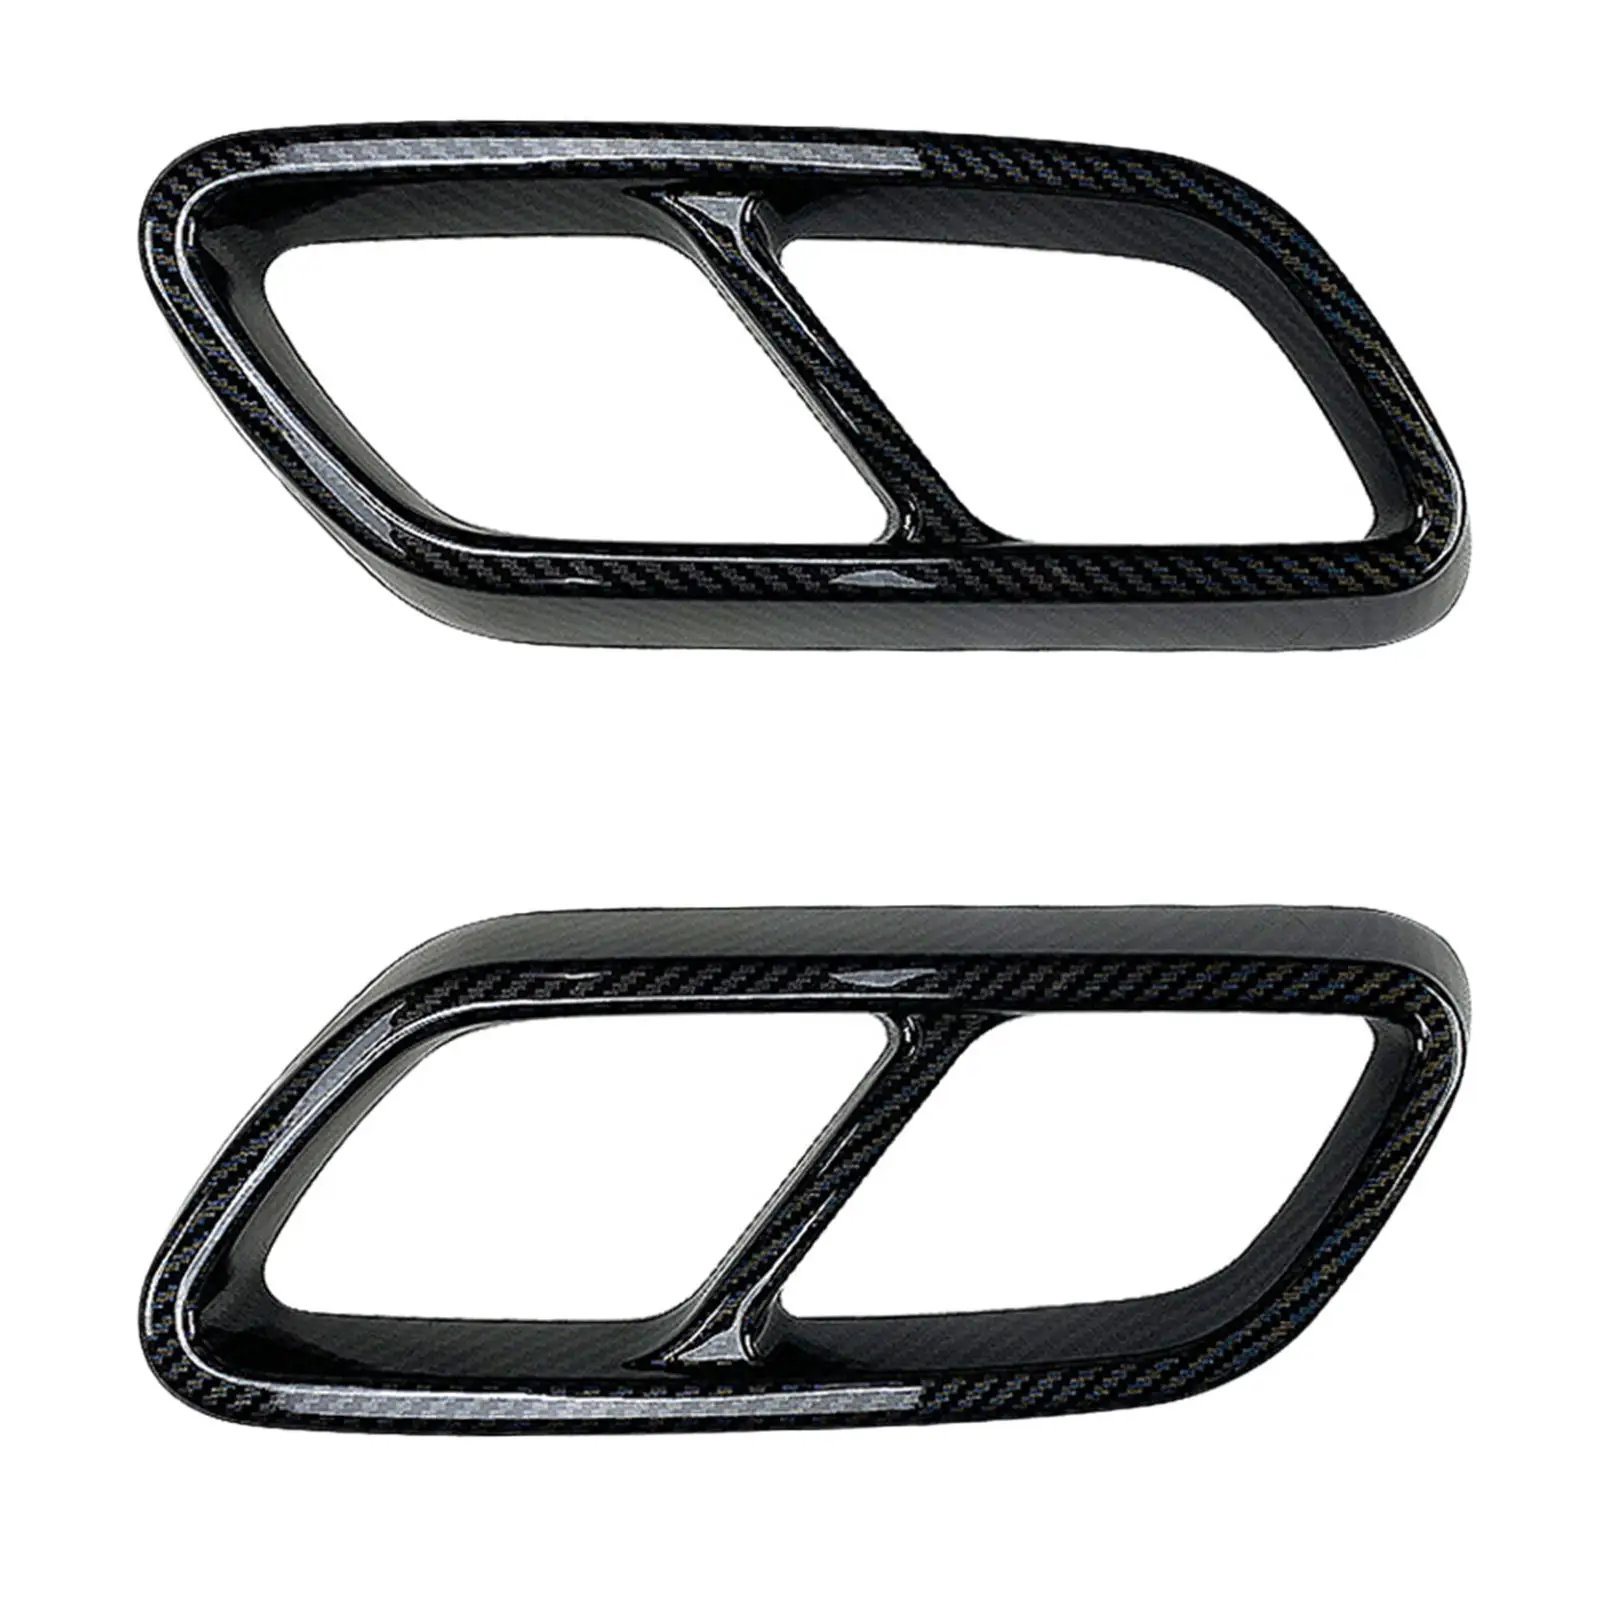 2x Exhaust Pipe Cover Trim Muffler Exterior Decoration Decorate Durable Sticks Covers Fits for Mercedes x253 2015-2018 W205